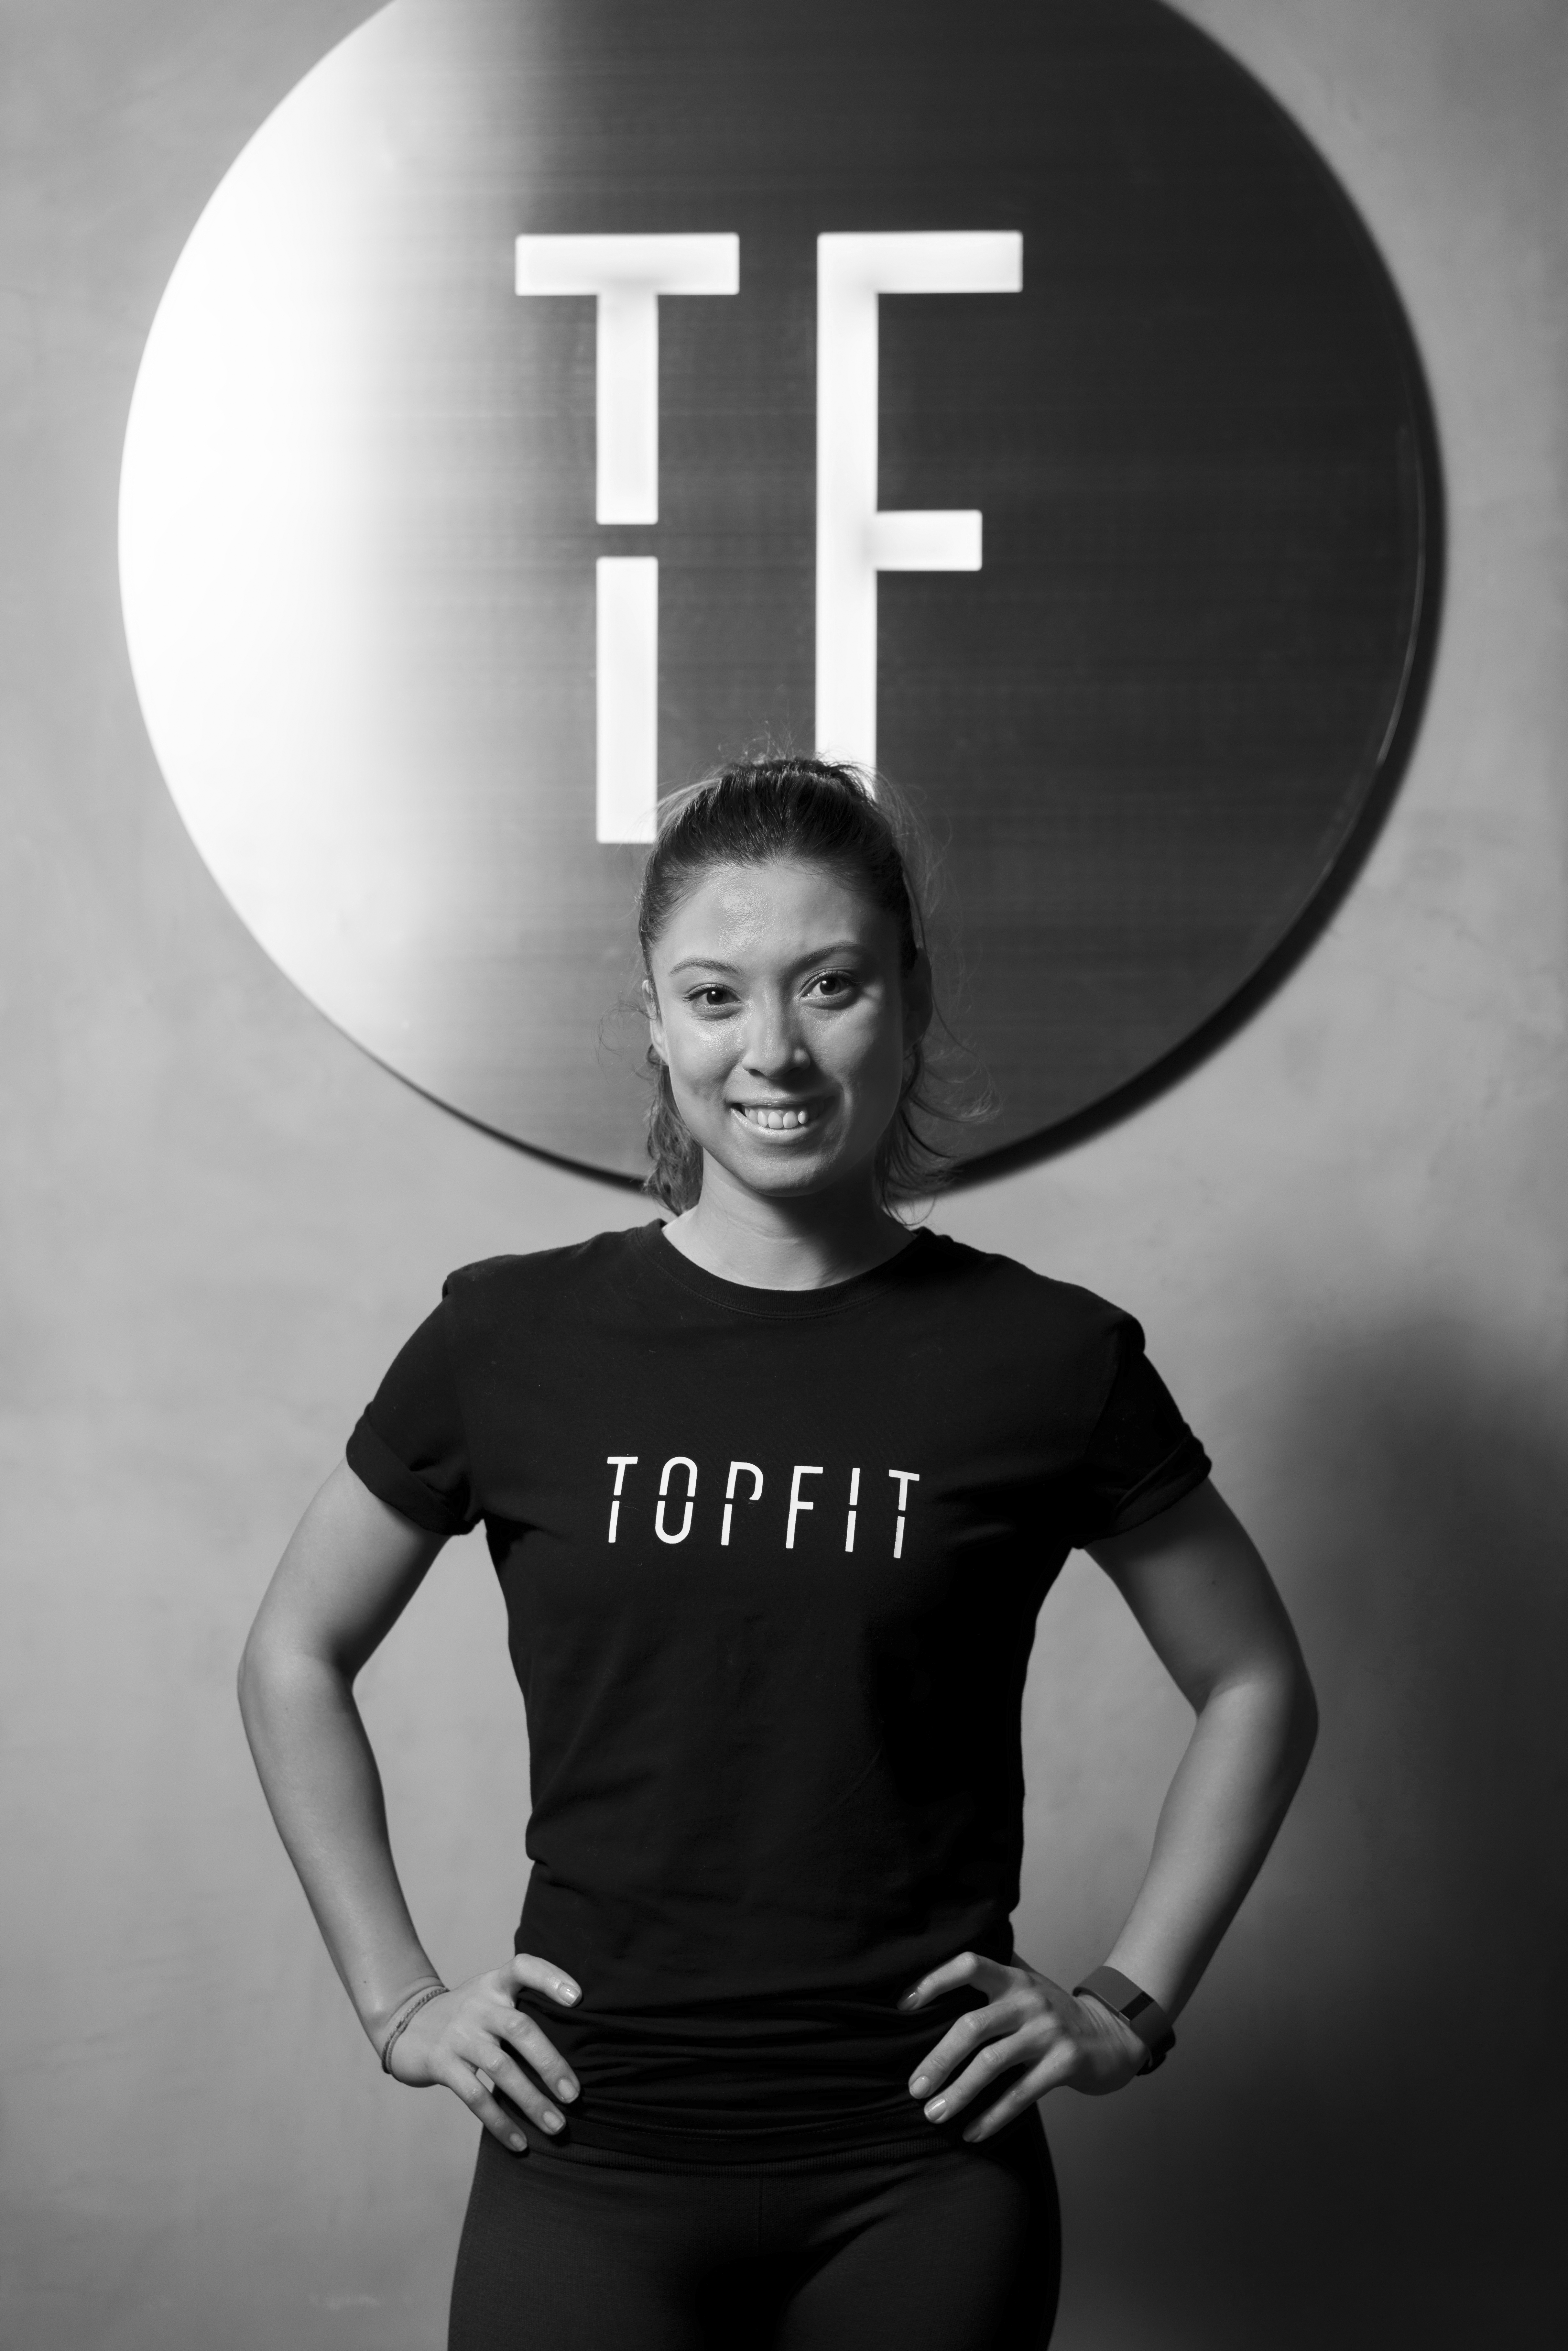 -- For TopfitMornings 12-week fitness challenge -- This image taken on February 5, 2016. Topfit trainer Heanney Mccollum. Photo / Alex Maeland [16FEBRUARY2016 FEATURES FITNESS & WELLBEING TopfitMornings]